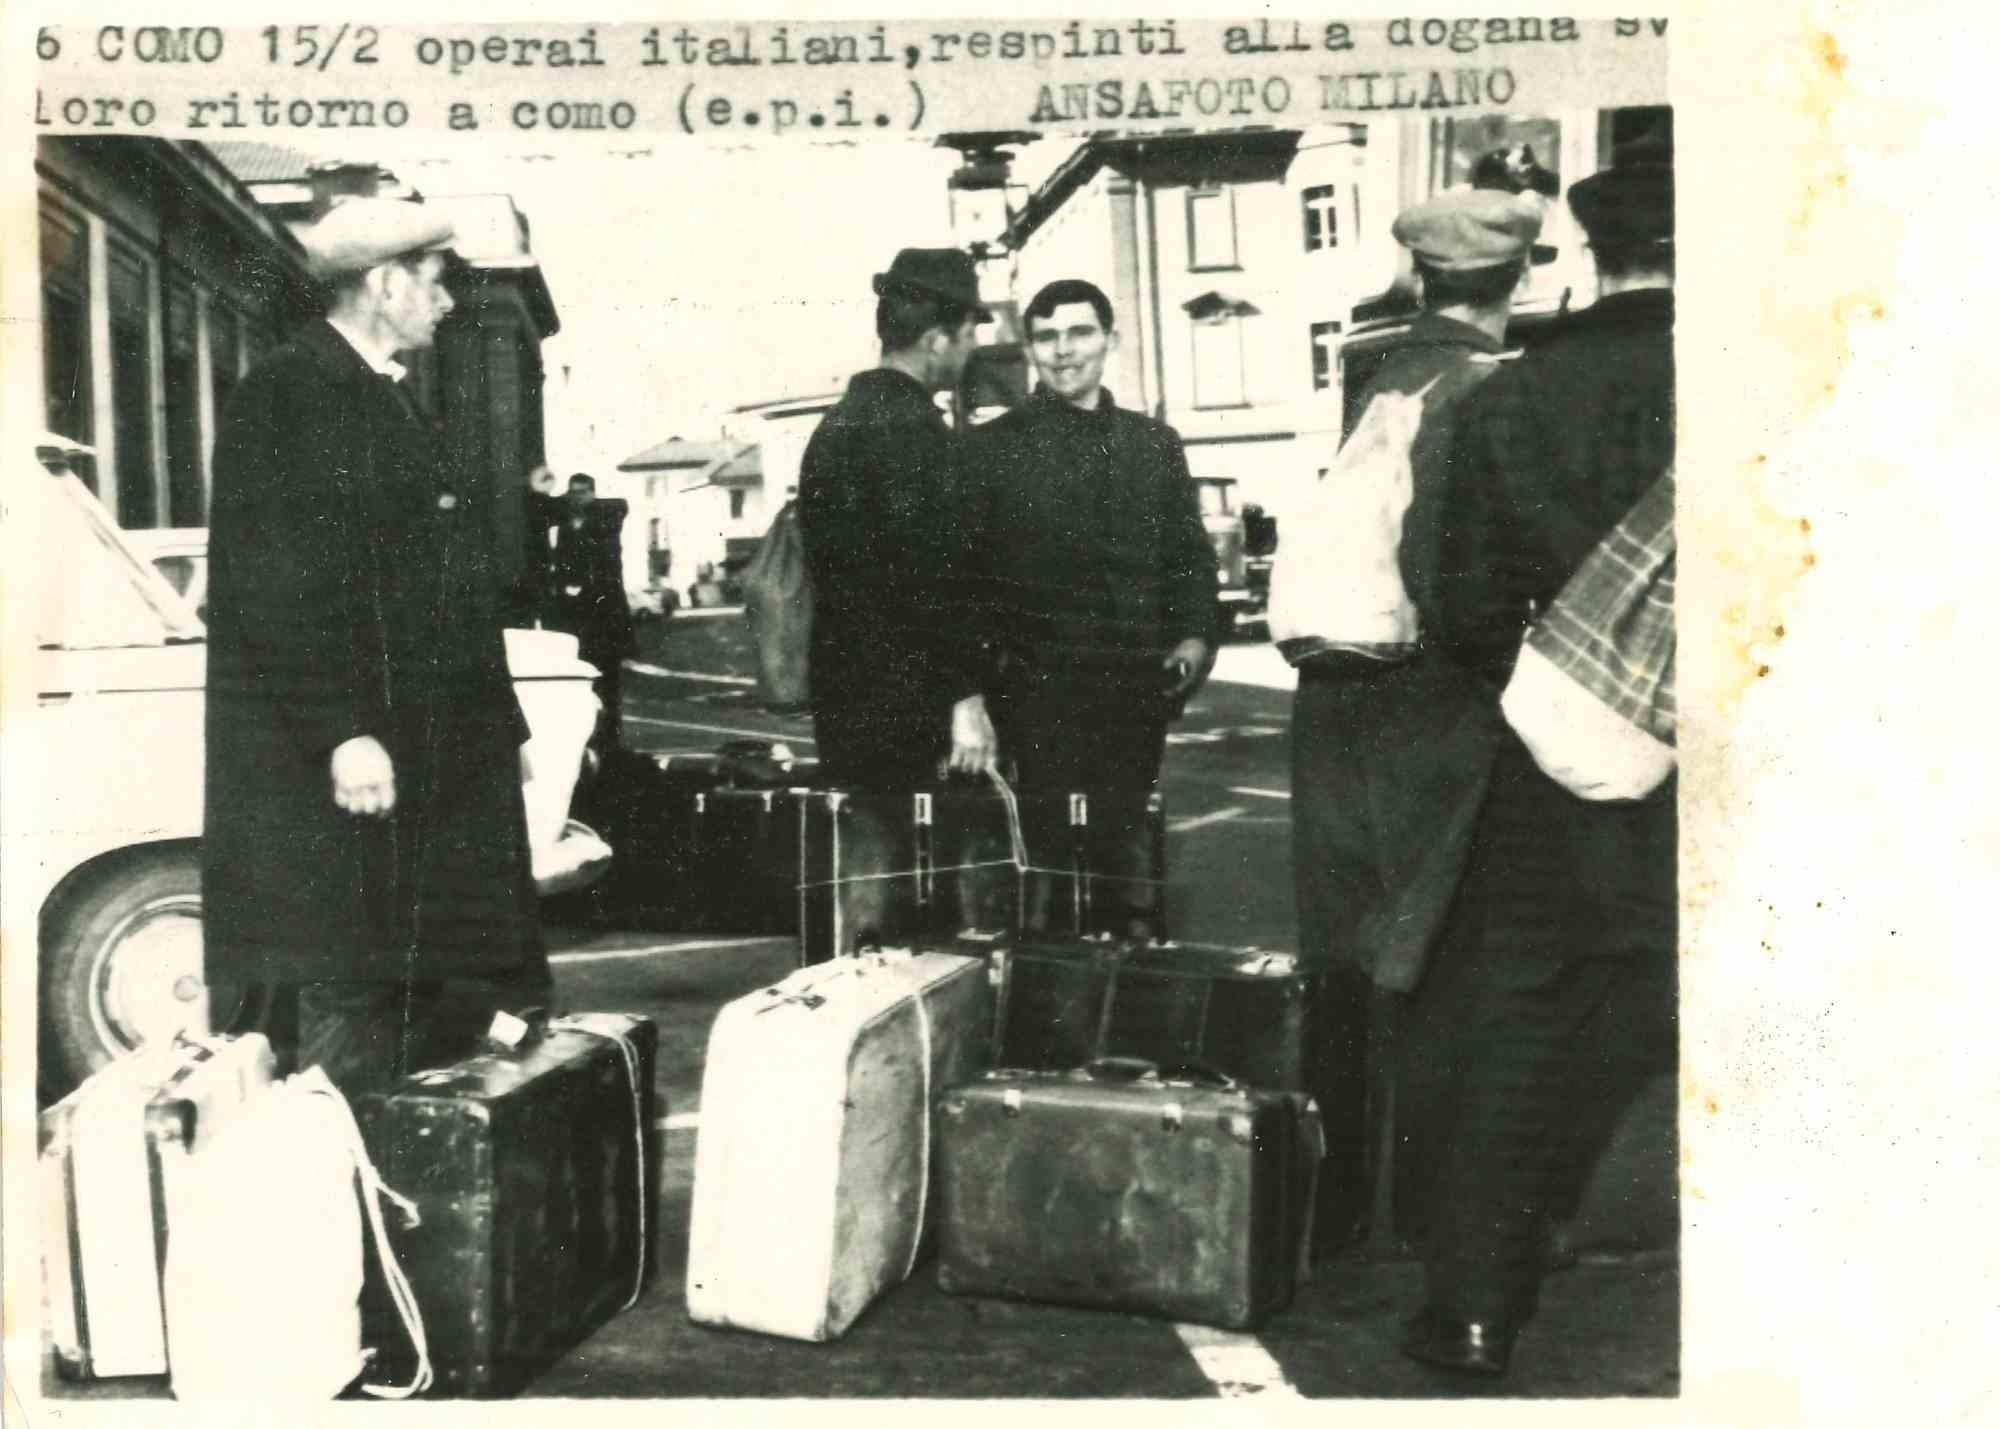 Unknown Figurative Photograph - Italian Workers in Border - Historical Photos  -1960s